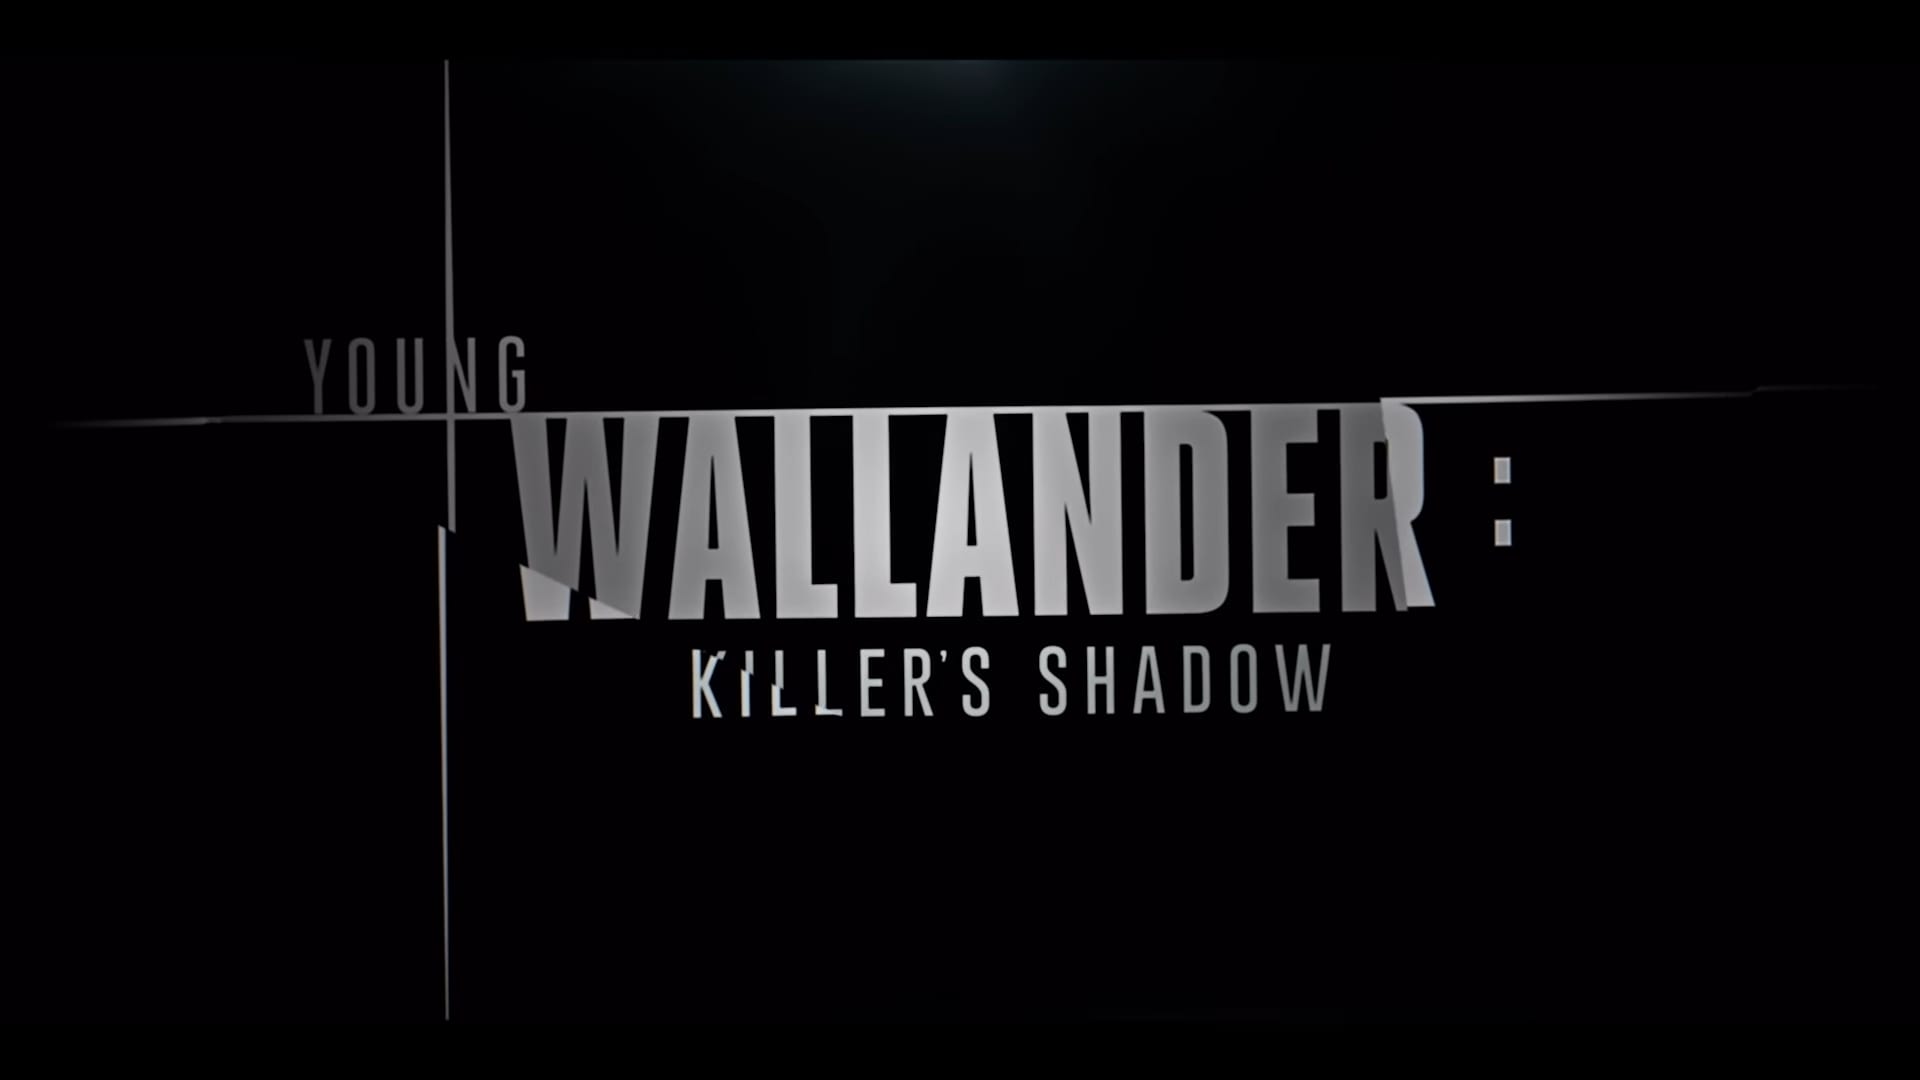 Young Wallander Killer’s Shadow Trailer, Coming to Netflix in February 2022